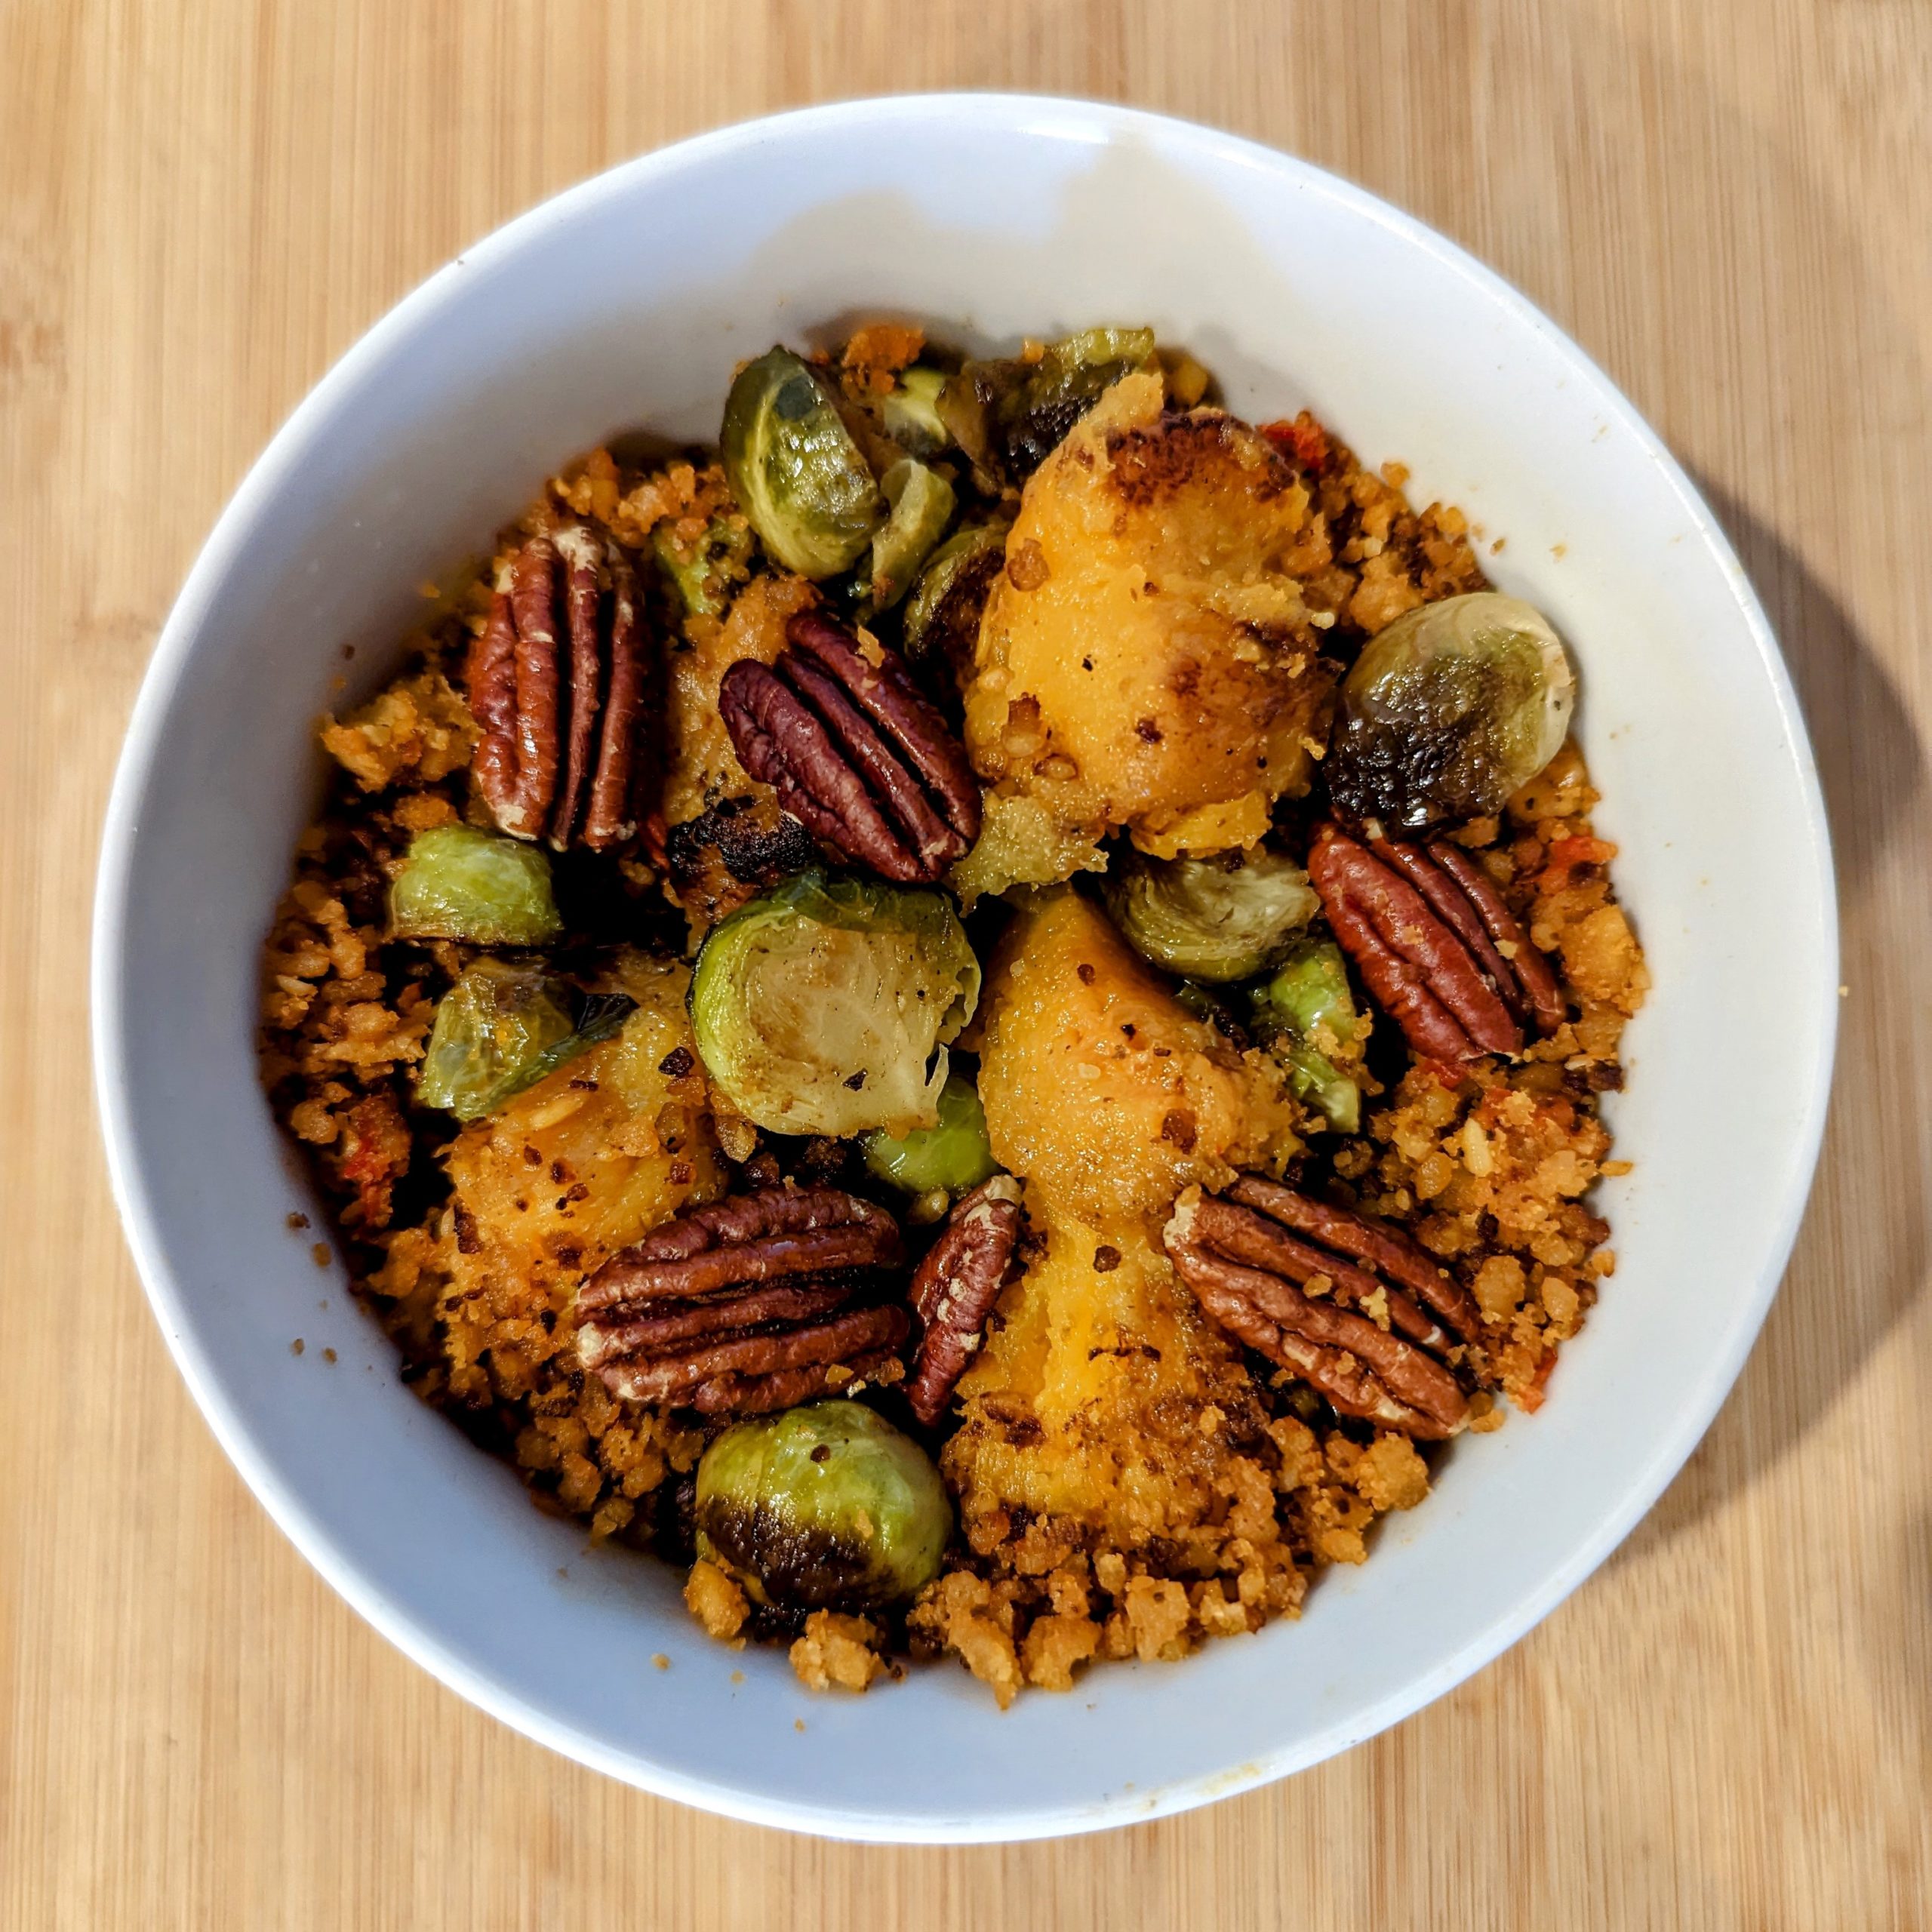 Roasted Triple Squash With Brussels Sprouts, Pecans And Cauli Crumble